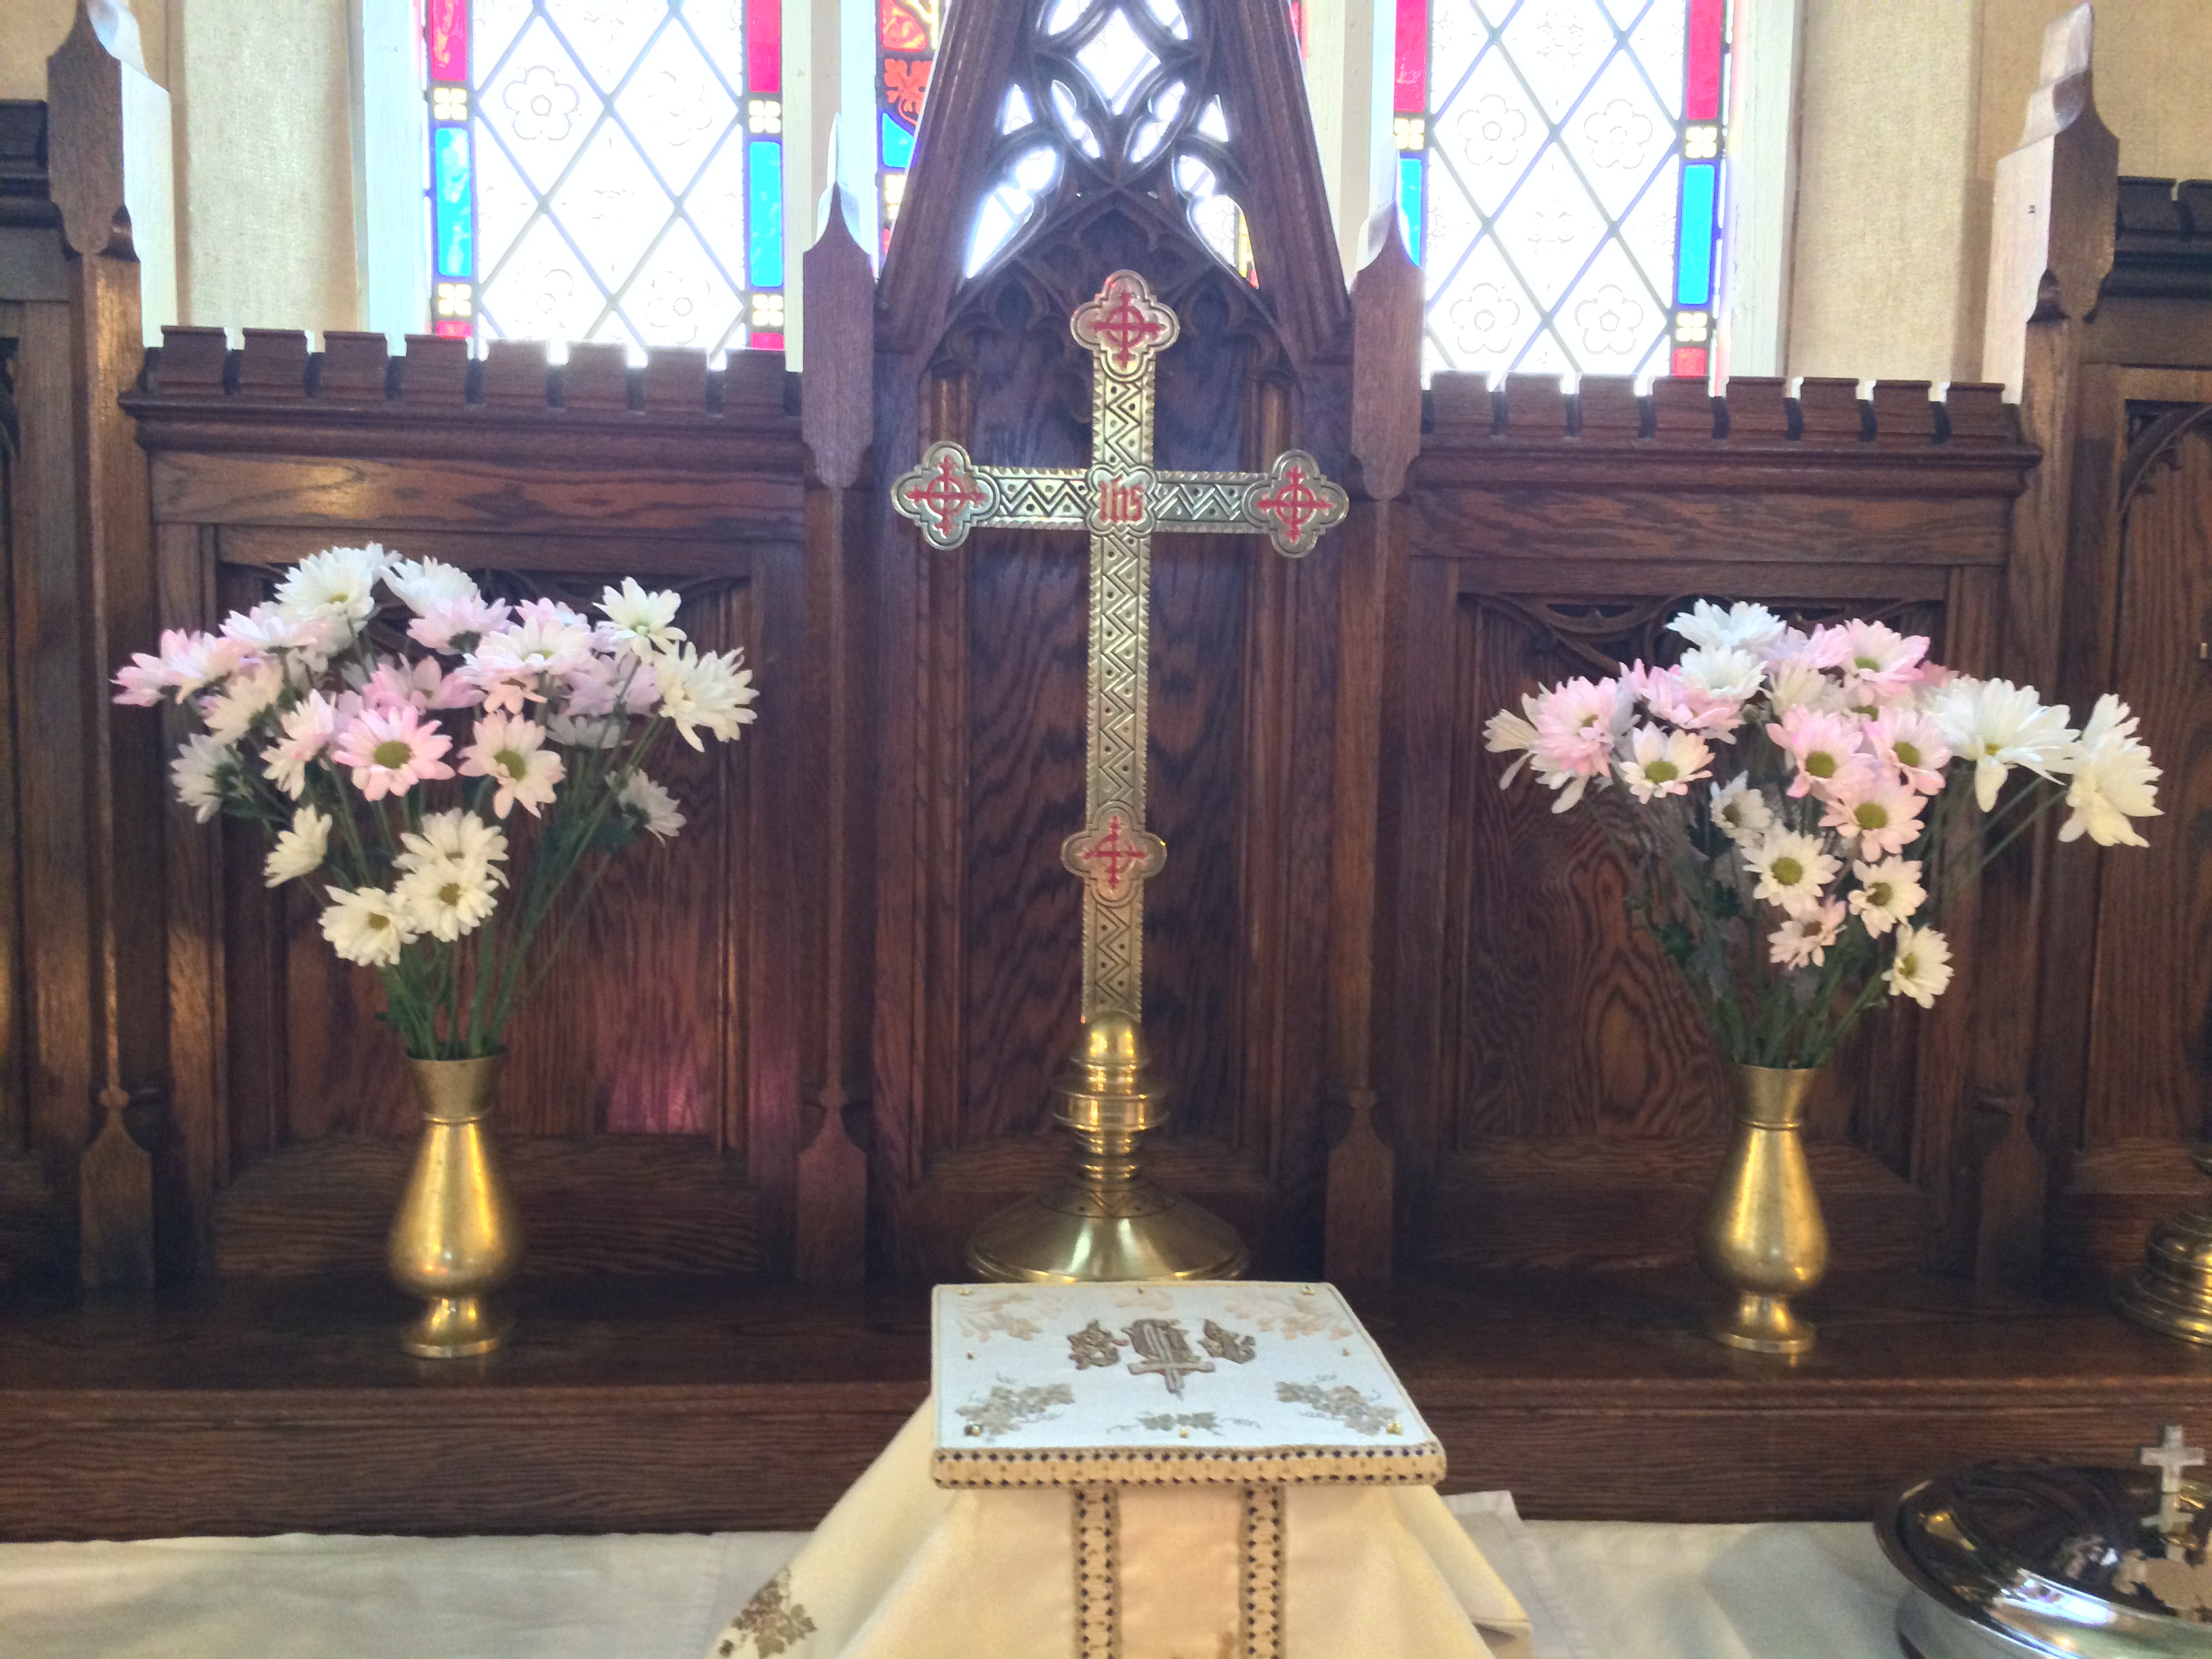 Sunday, October 30th at St. Luke's: Flowers on the Altar.